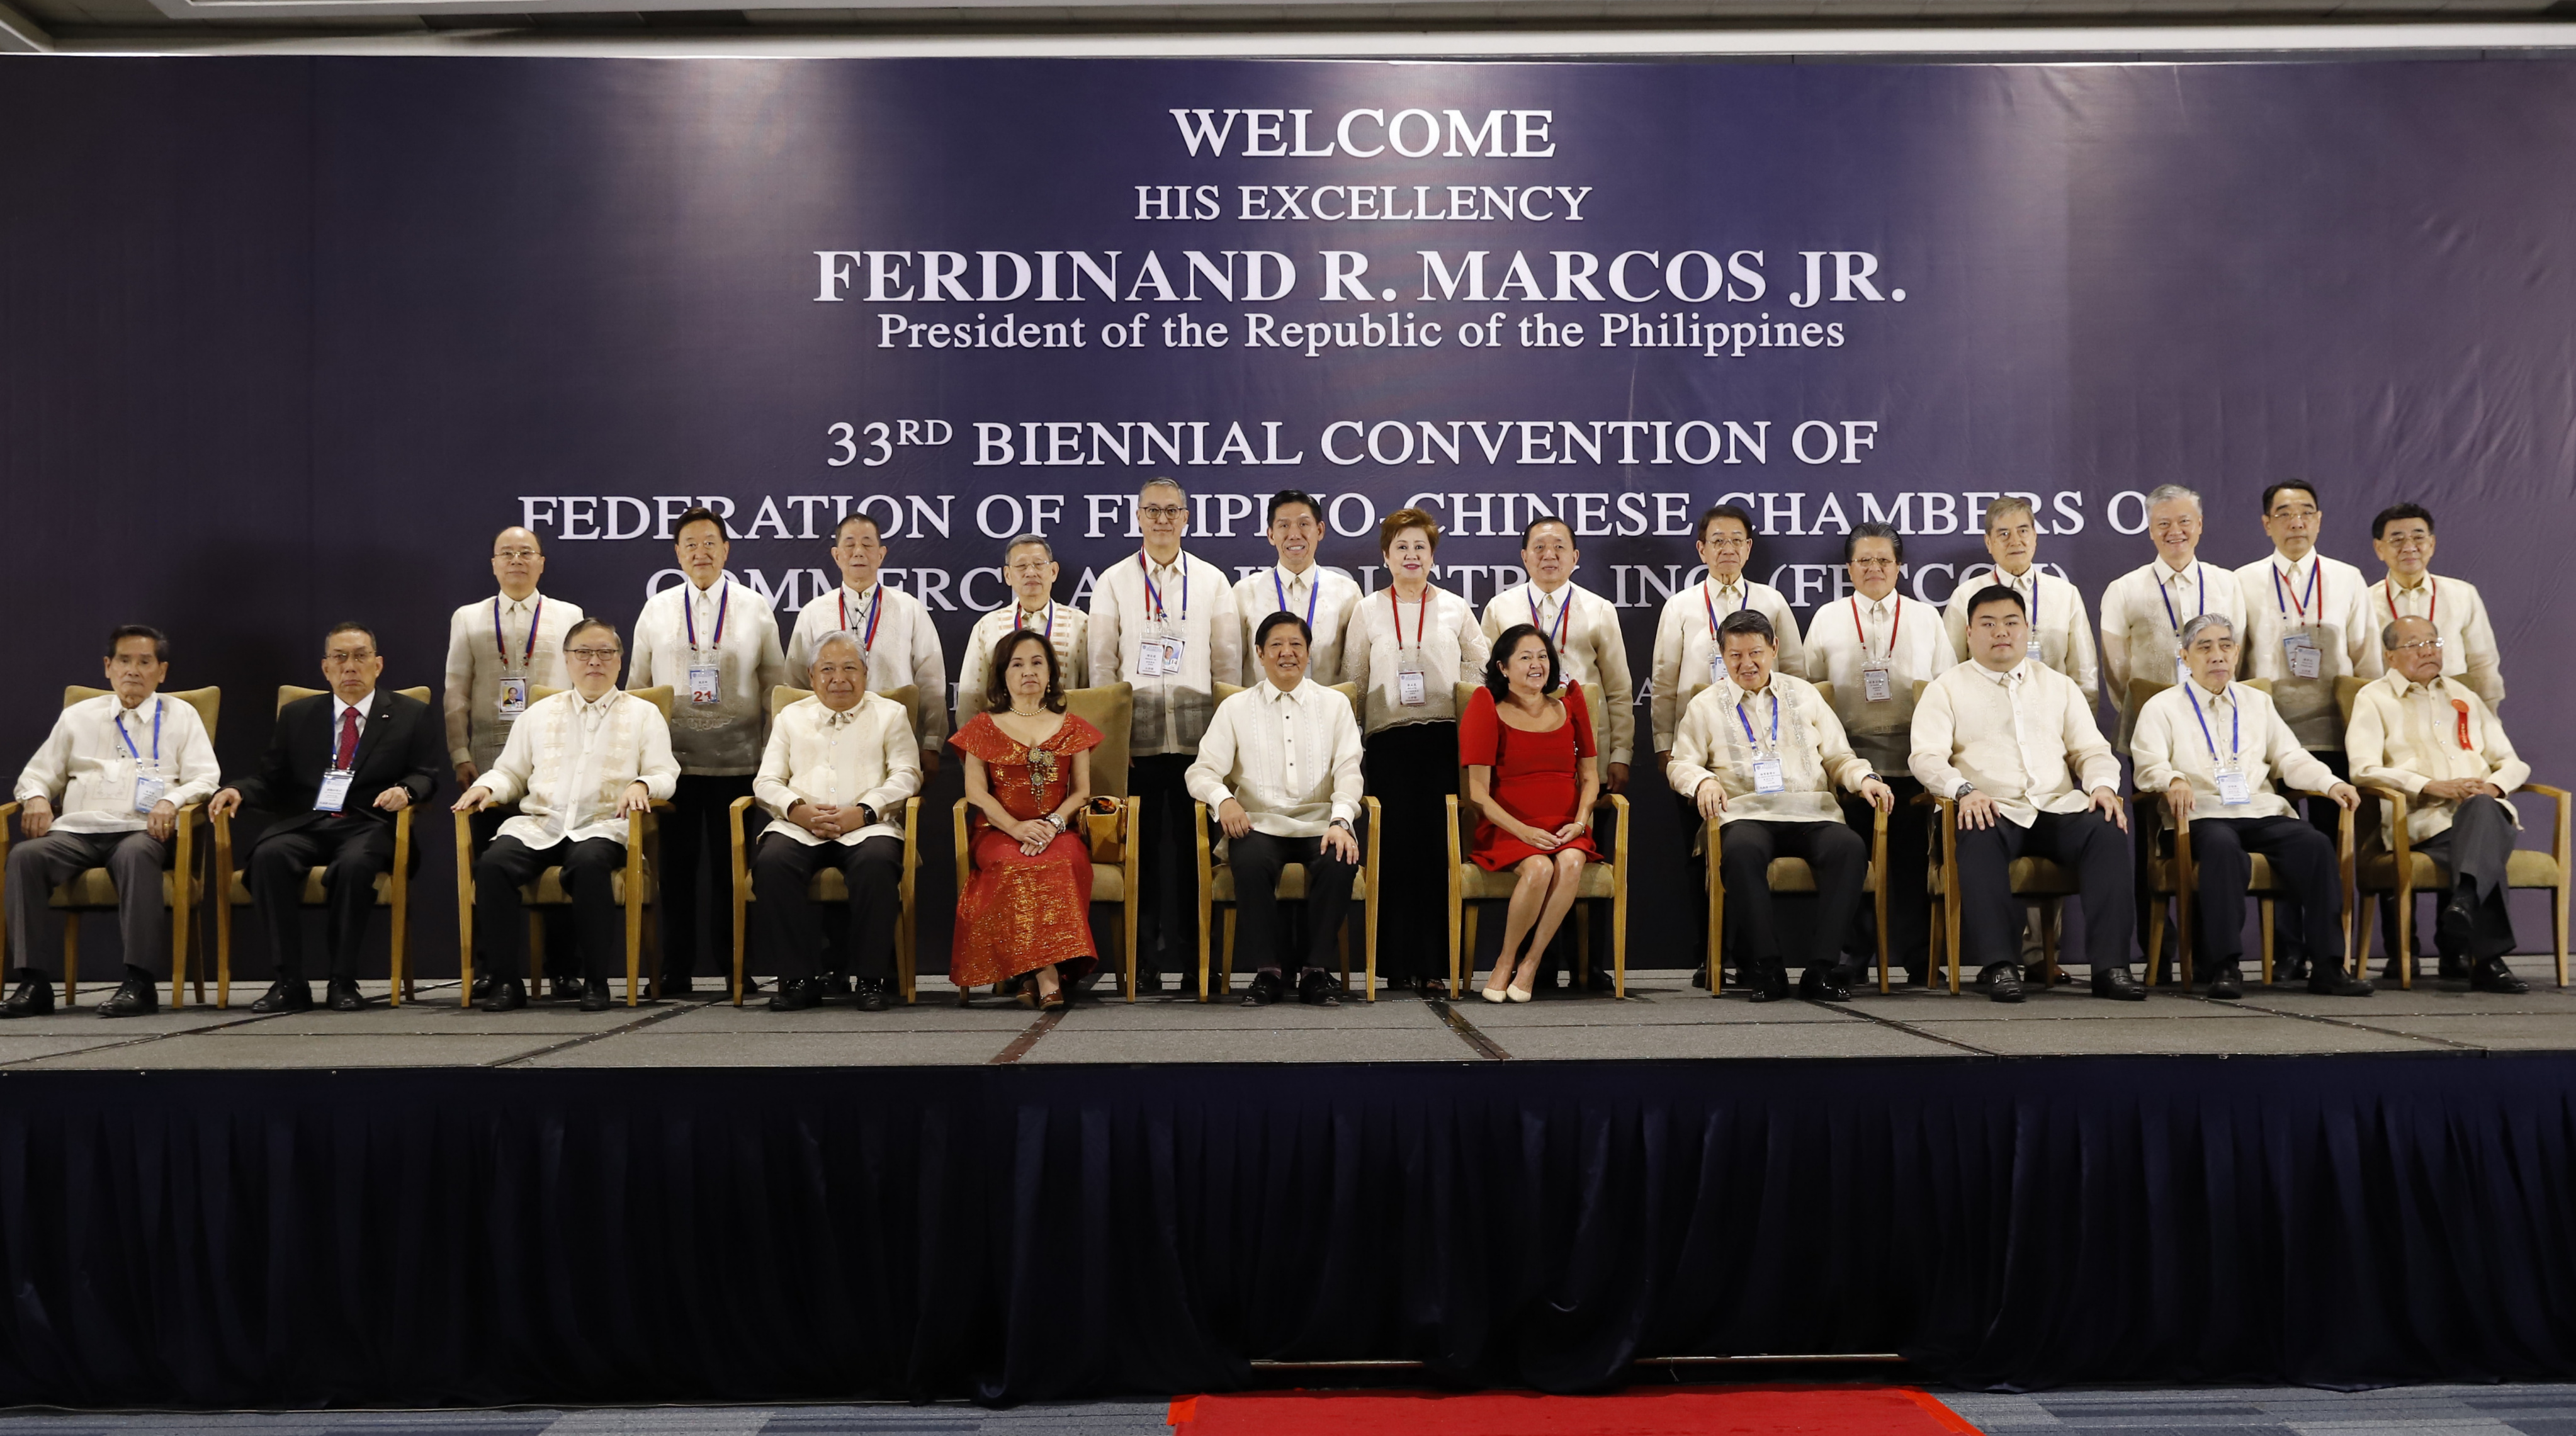 President Marcos attends 33rd Biennial Convention of Federation of Filipino-Chinese Chambers of Commerce and Industry, Inc.